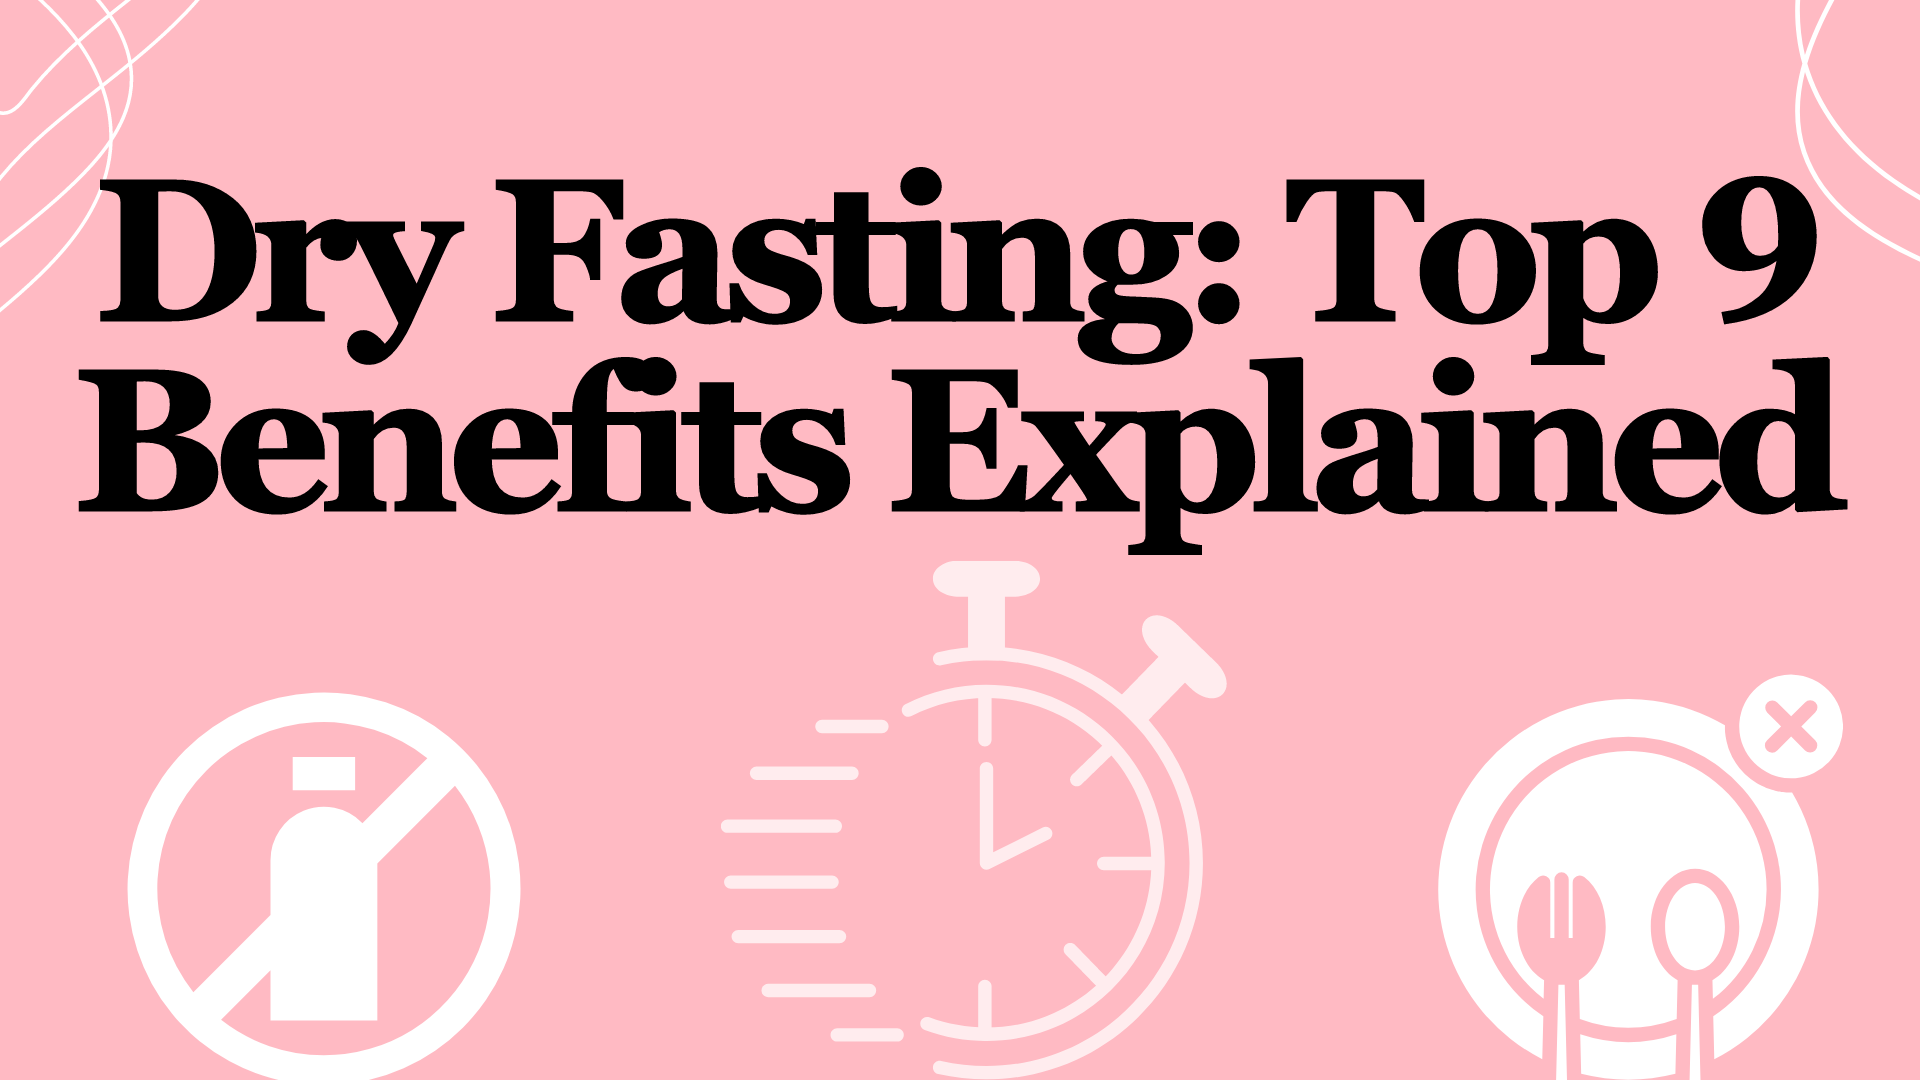 Benefits Of Dry Fasting